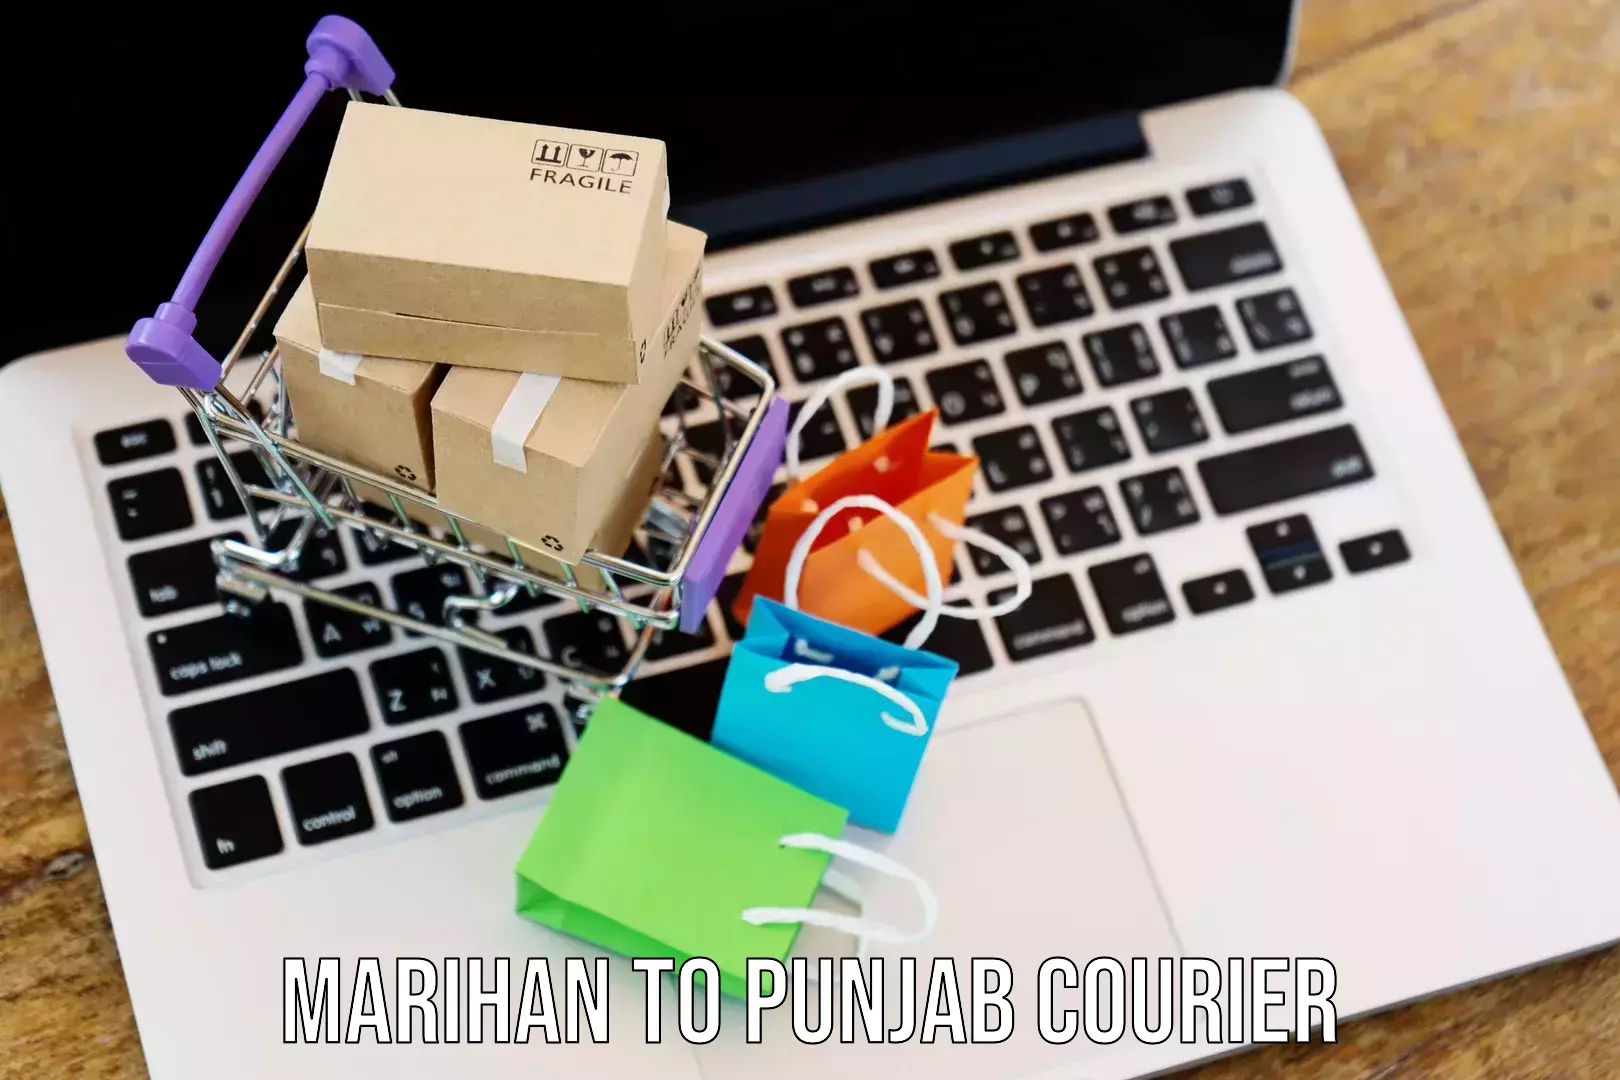 Automated shipping in Marihan to Punjab